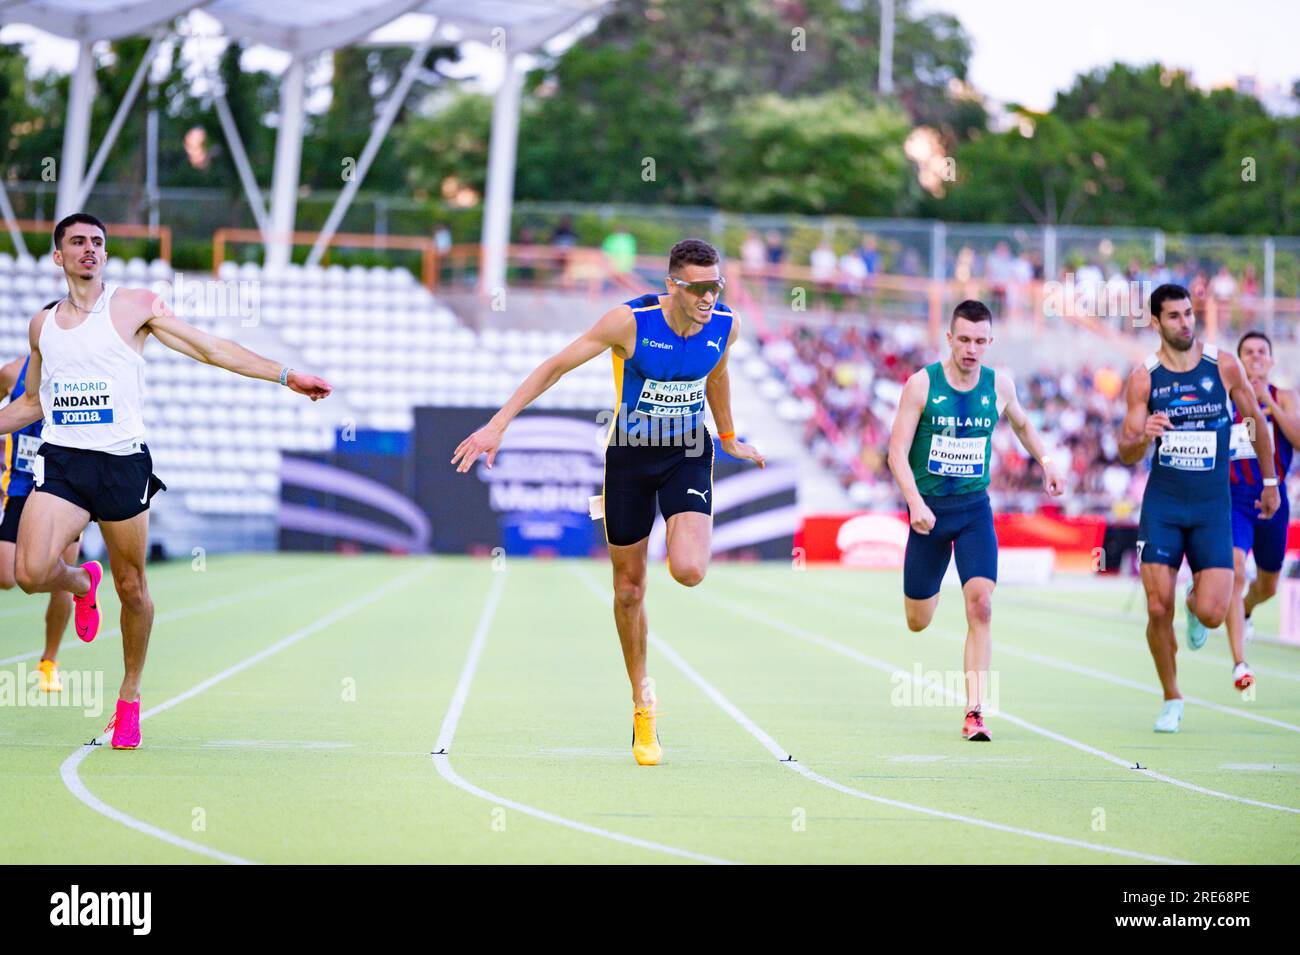 Dylan Borlee (C) competes against  (from L to R) Jonathan Borlee, Teo Andant, Christopher O'Donnel, Samuel Garcia, Lucas Bua in the men 400 metres sprint race final during the WACT/Europe Silver Athletics Meeting celebrated in Madrid at Vallehermoso stadium. Stock Photo